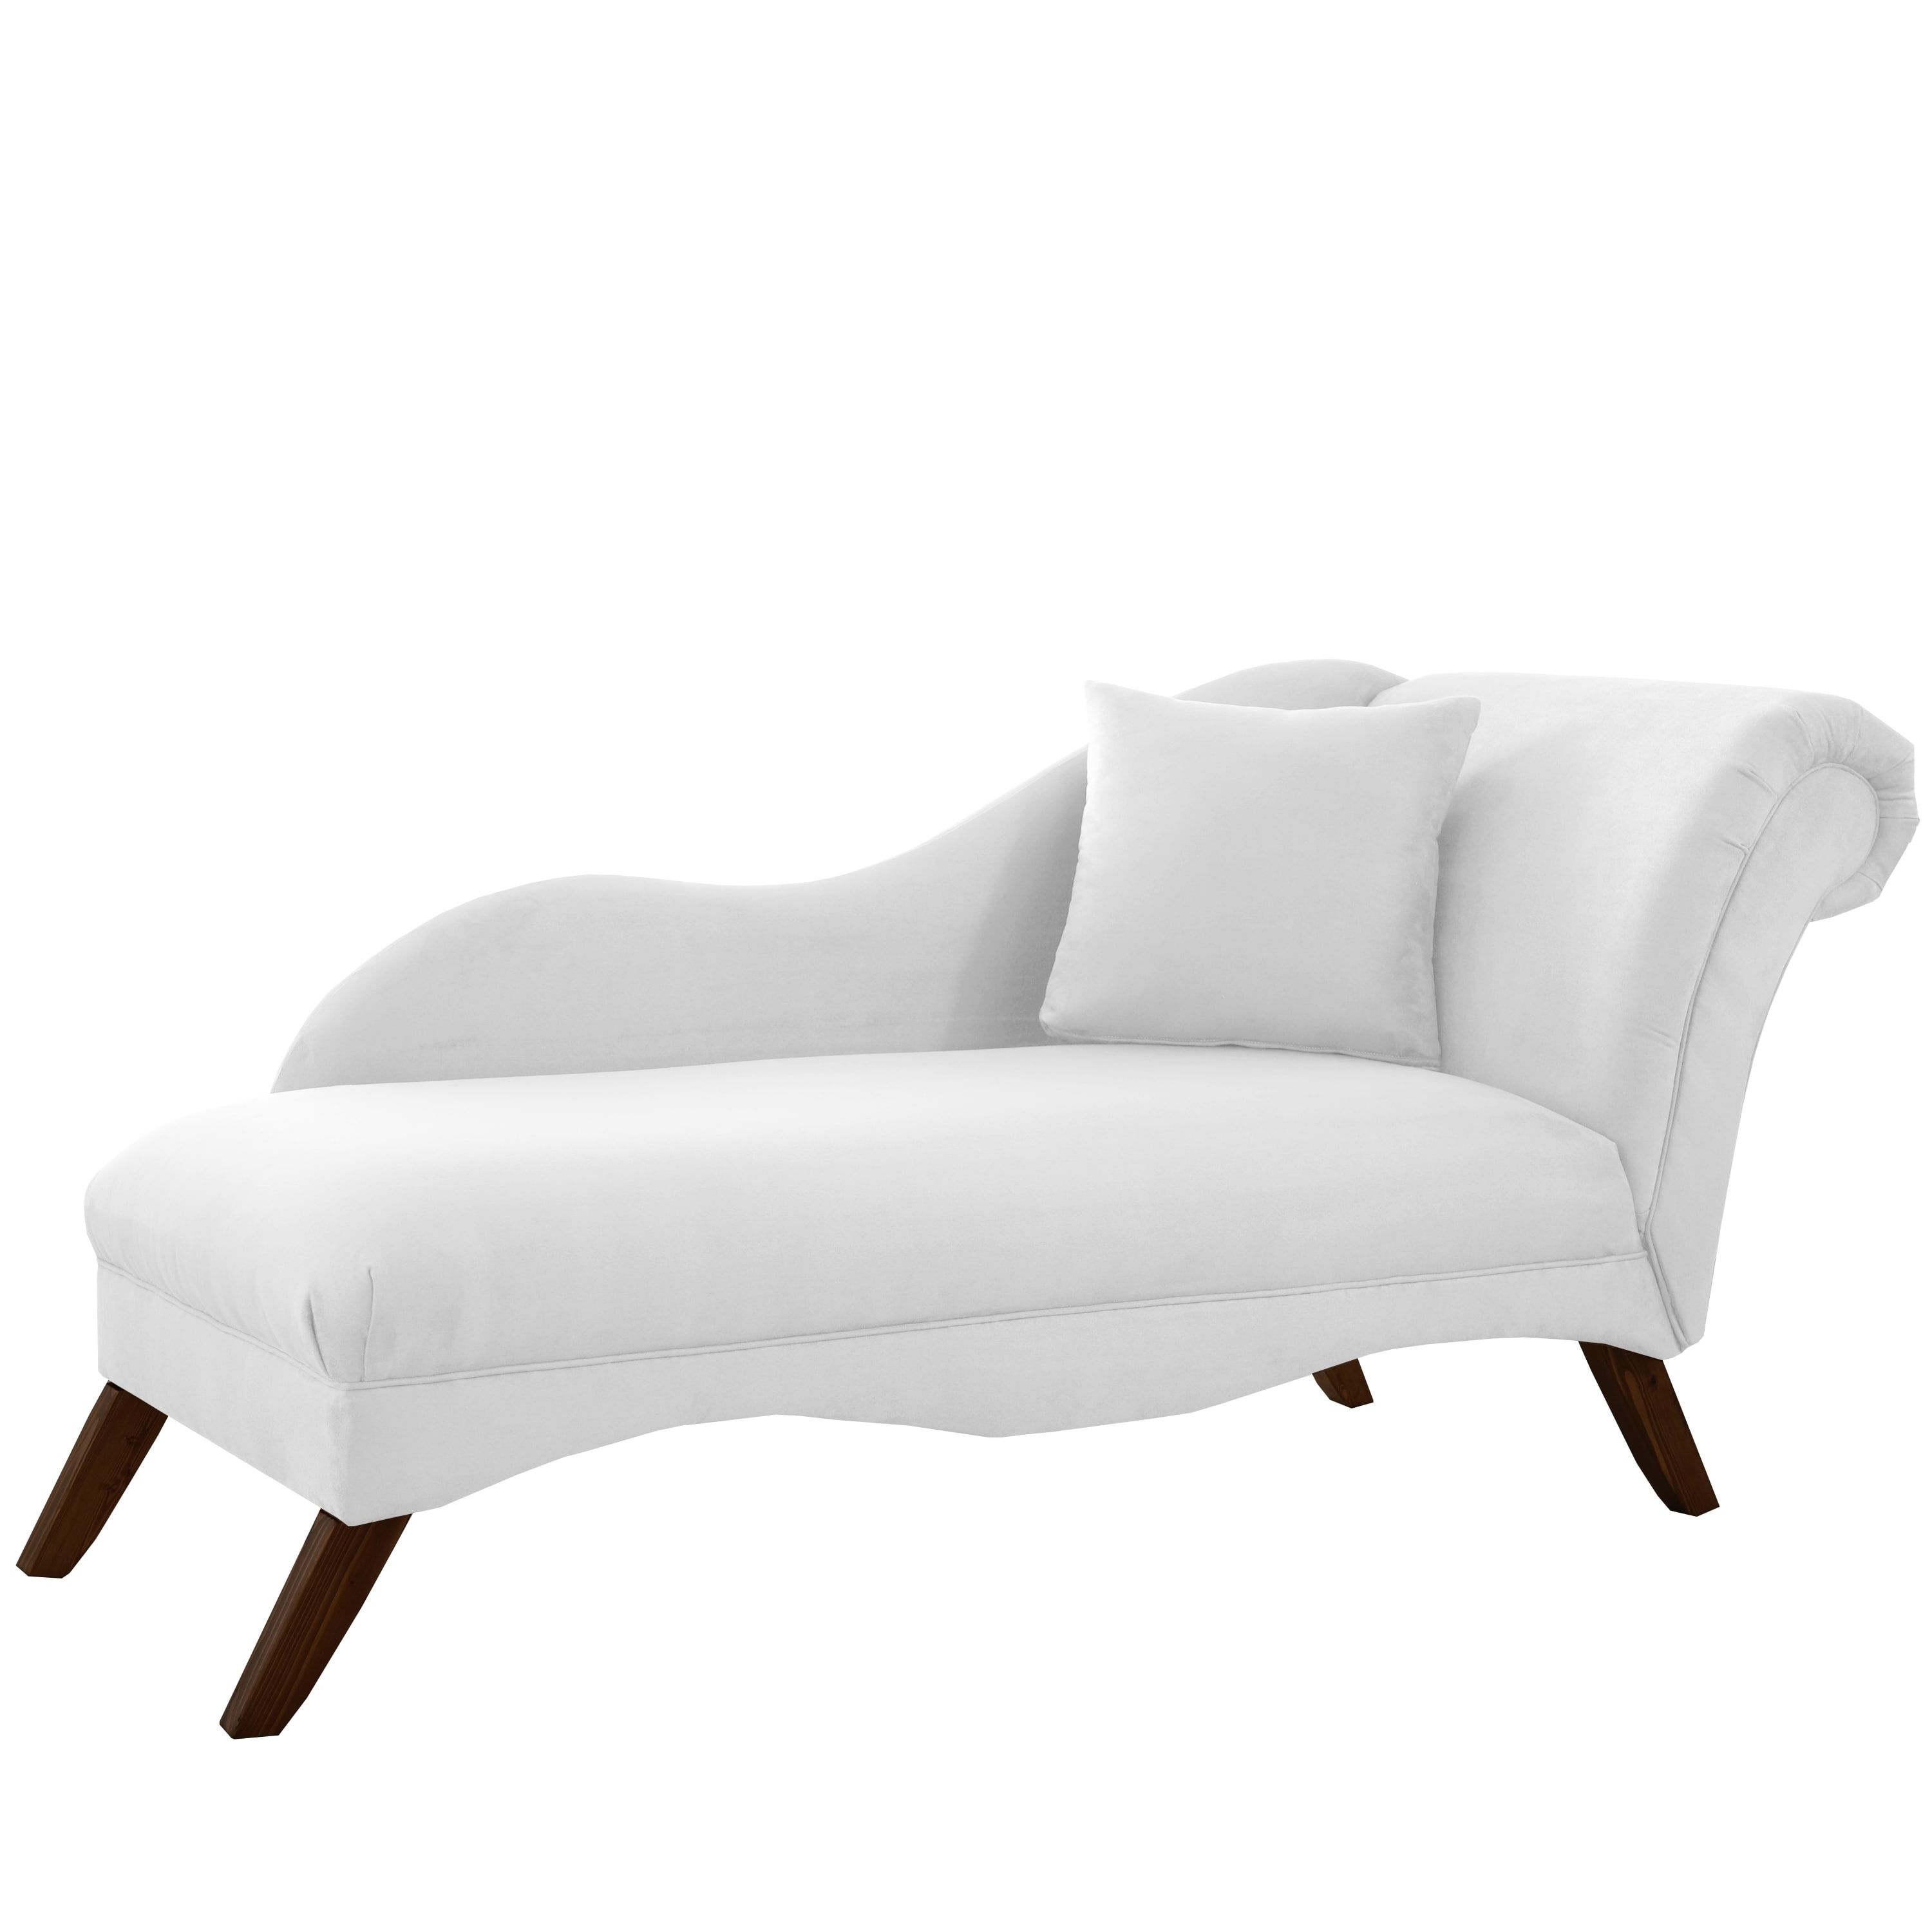 Current Skyline Furniture Chaise Lounge In Velvet White – Free Shipping With Overstock Chaise Lounges (View 7 of 15)